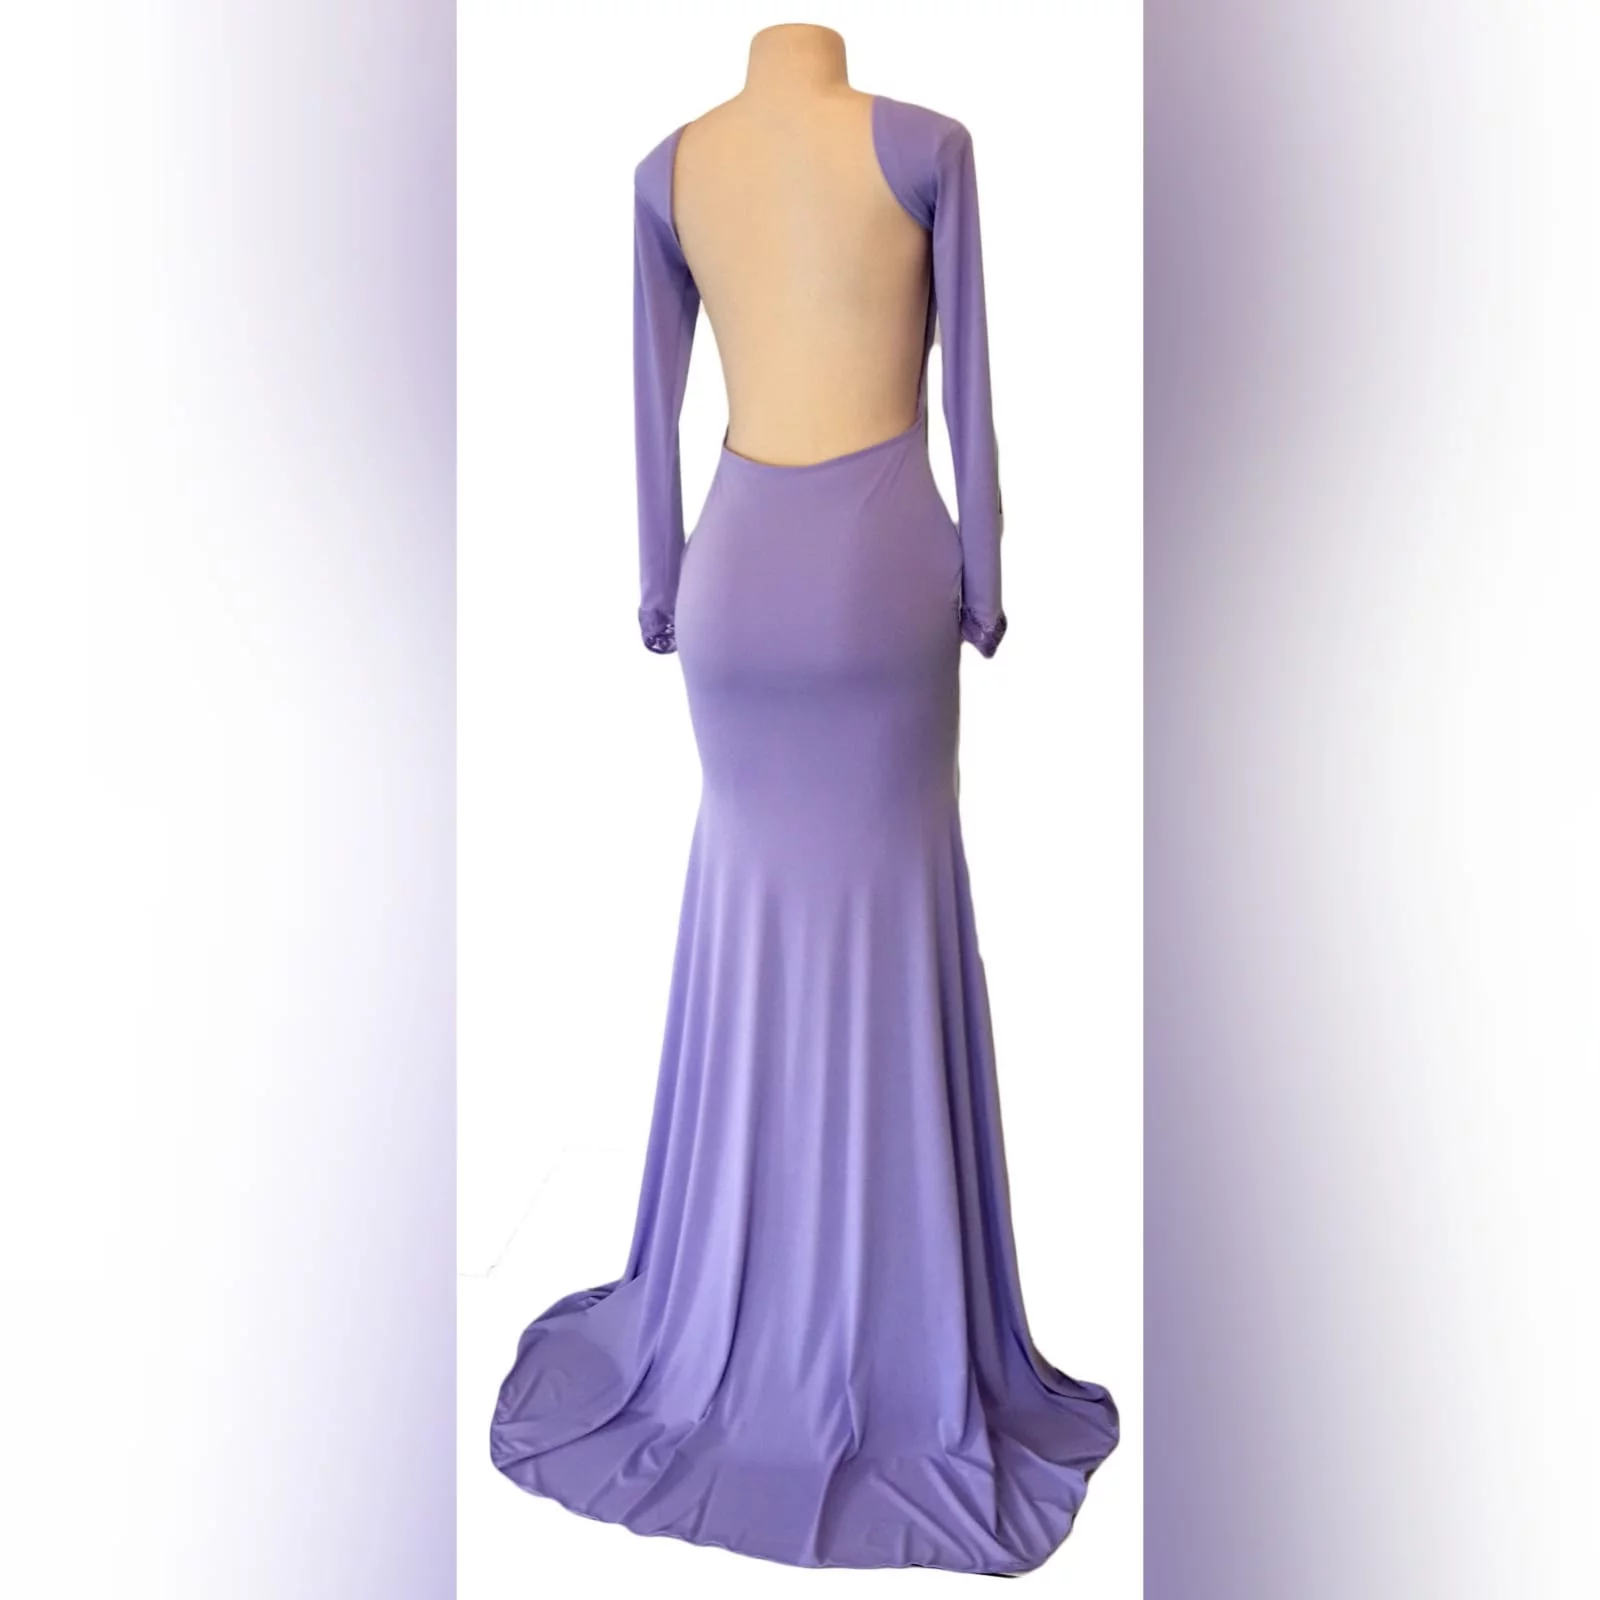 Body fitting lilac soft mermaid matric farewell dress and a jewel neckline 6 body fitting lilac soft memaid matric farewell dress and a jewel neckline. Low open square back. With a train and long sleeves. Sleeves finished with lace.